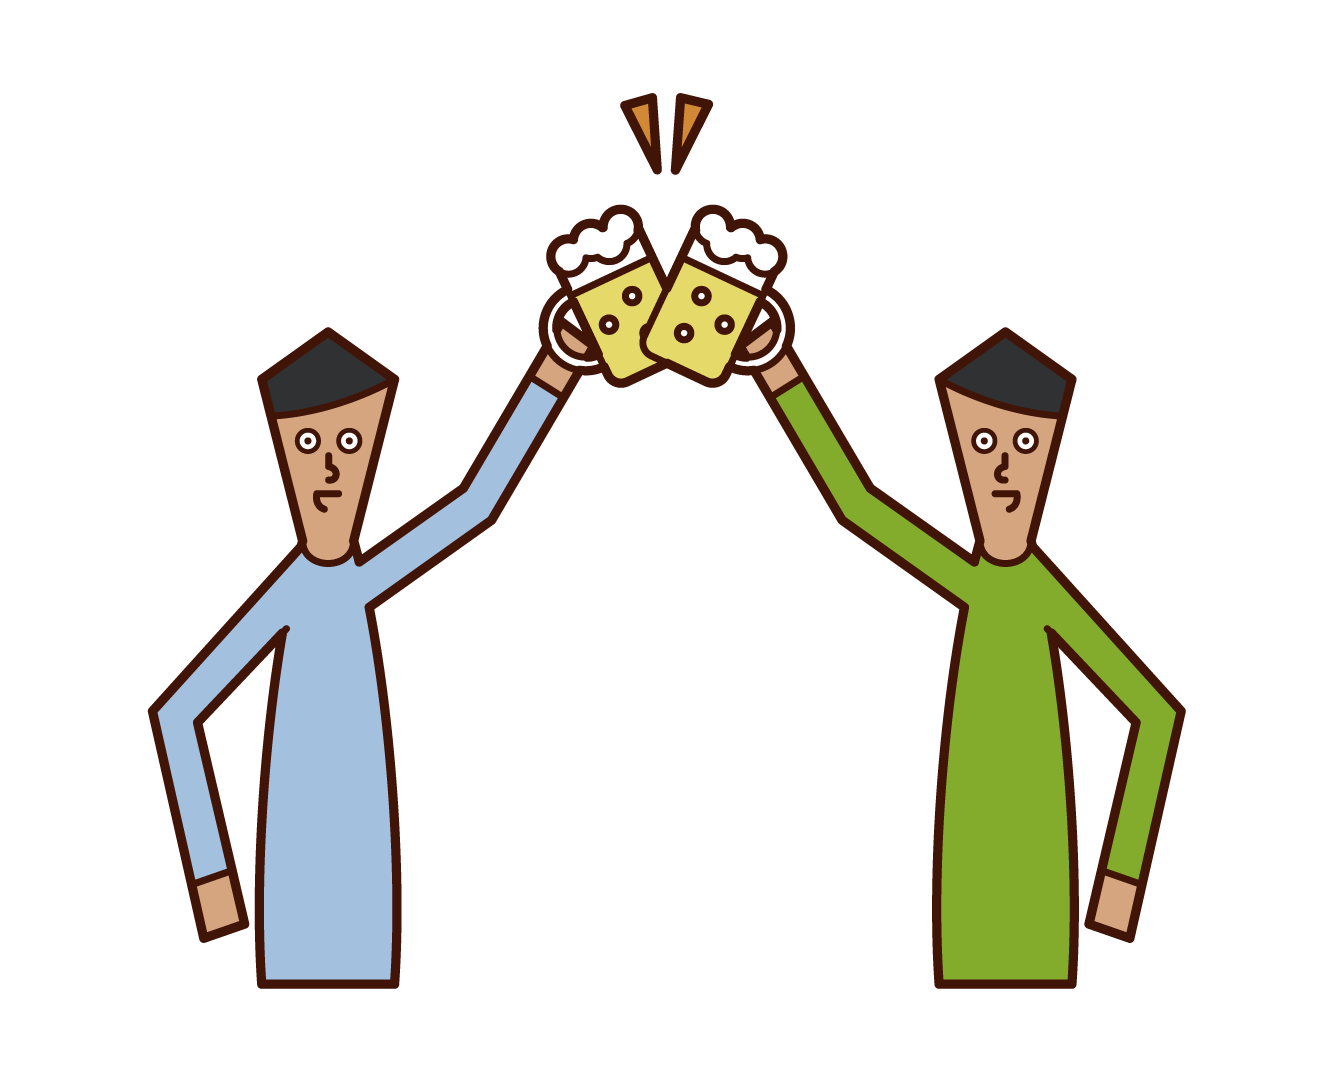 Illustration of people (men) toasting with beer